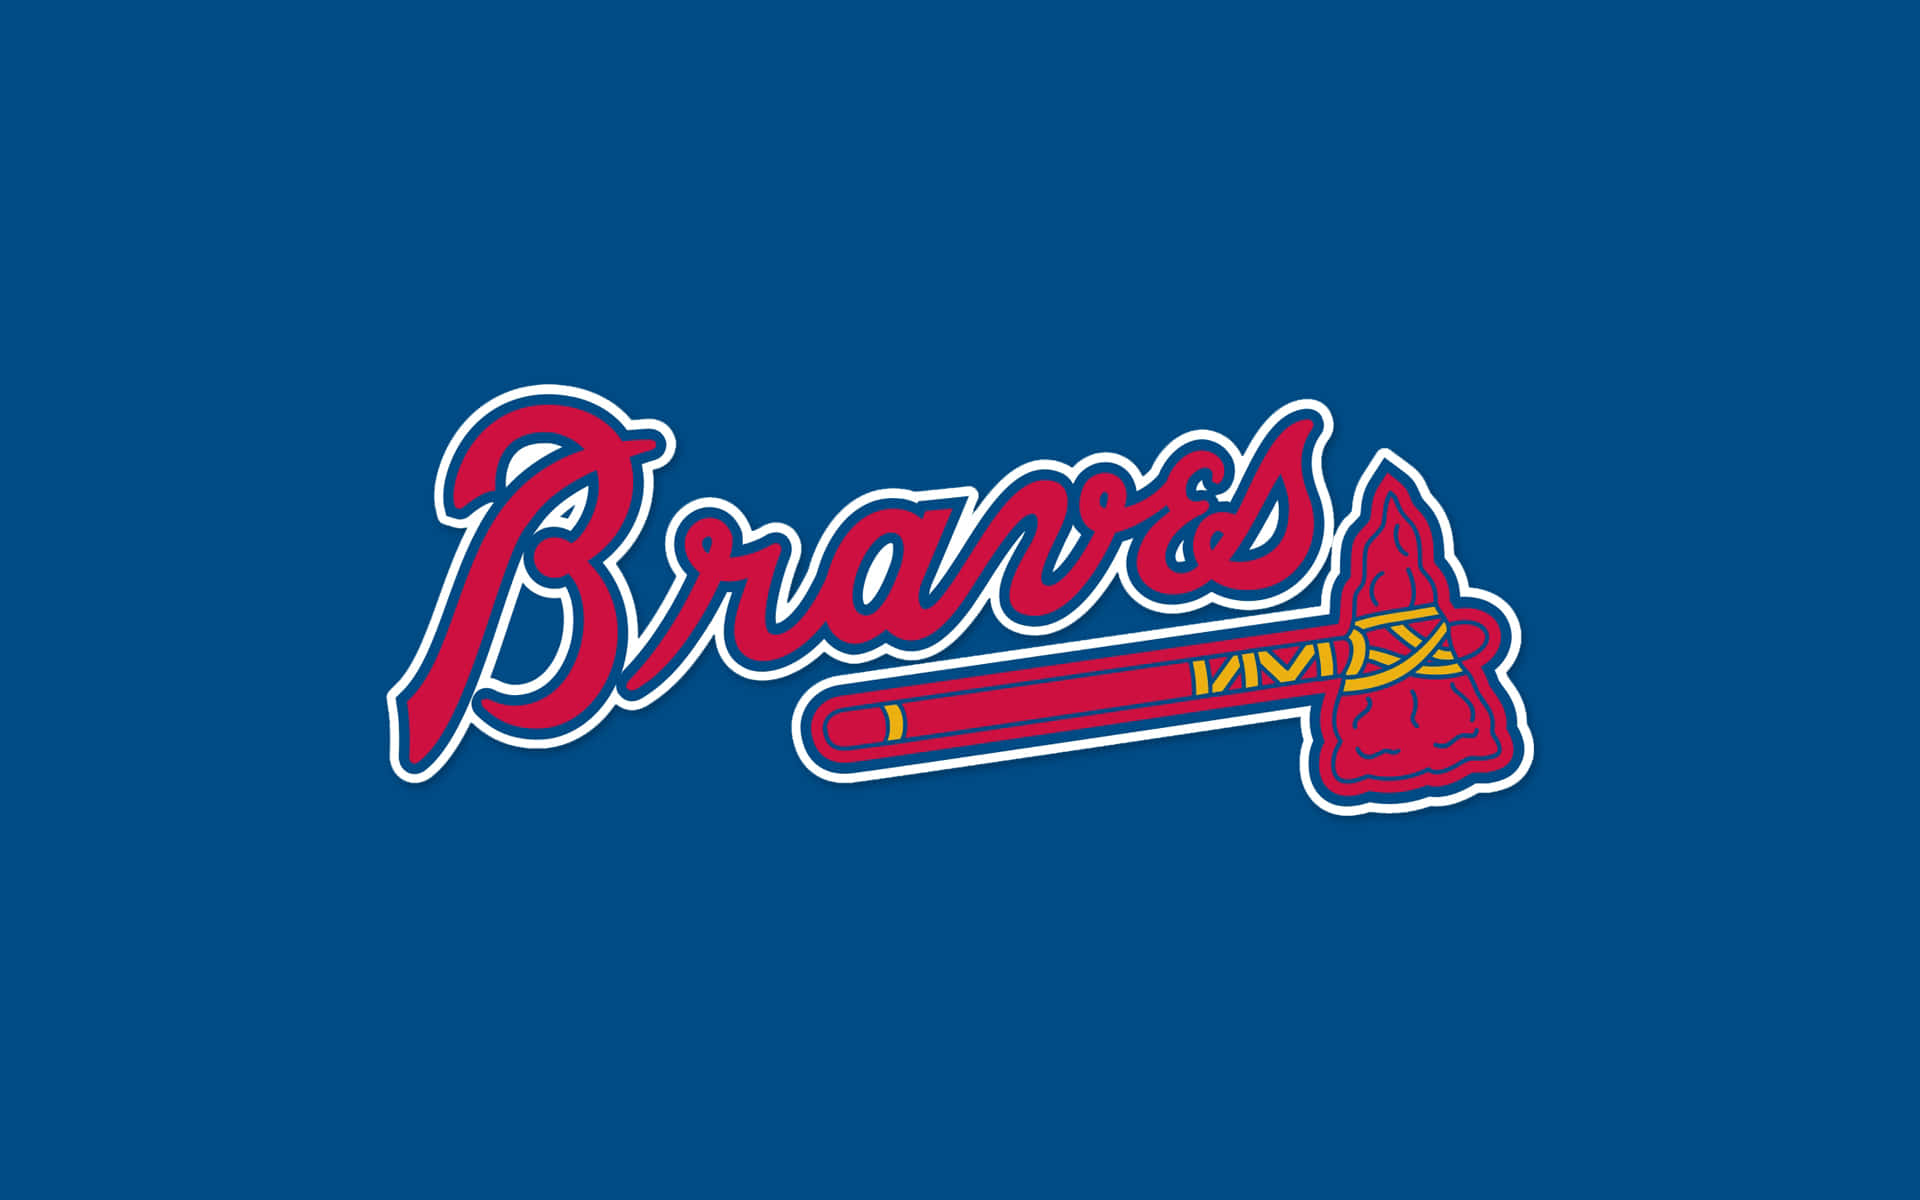 Show your support with the Atlanta Braves Desktop background Wallpaper